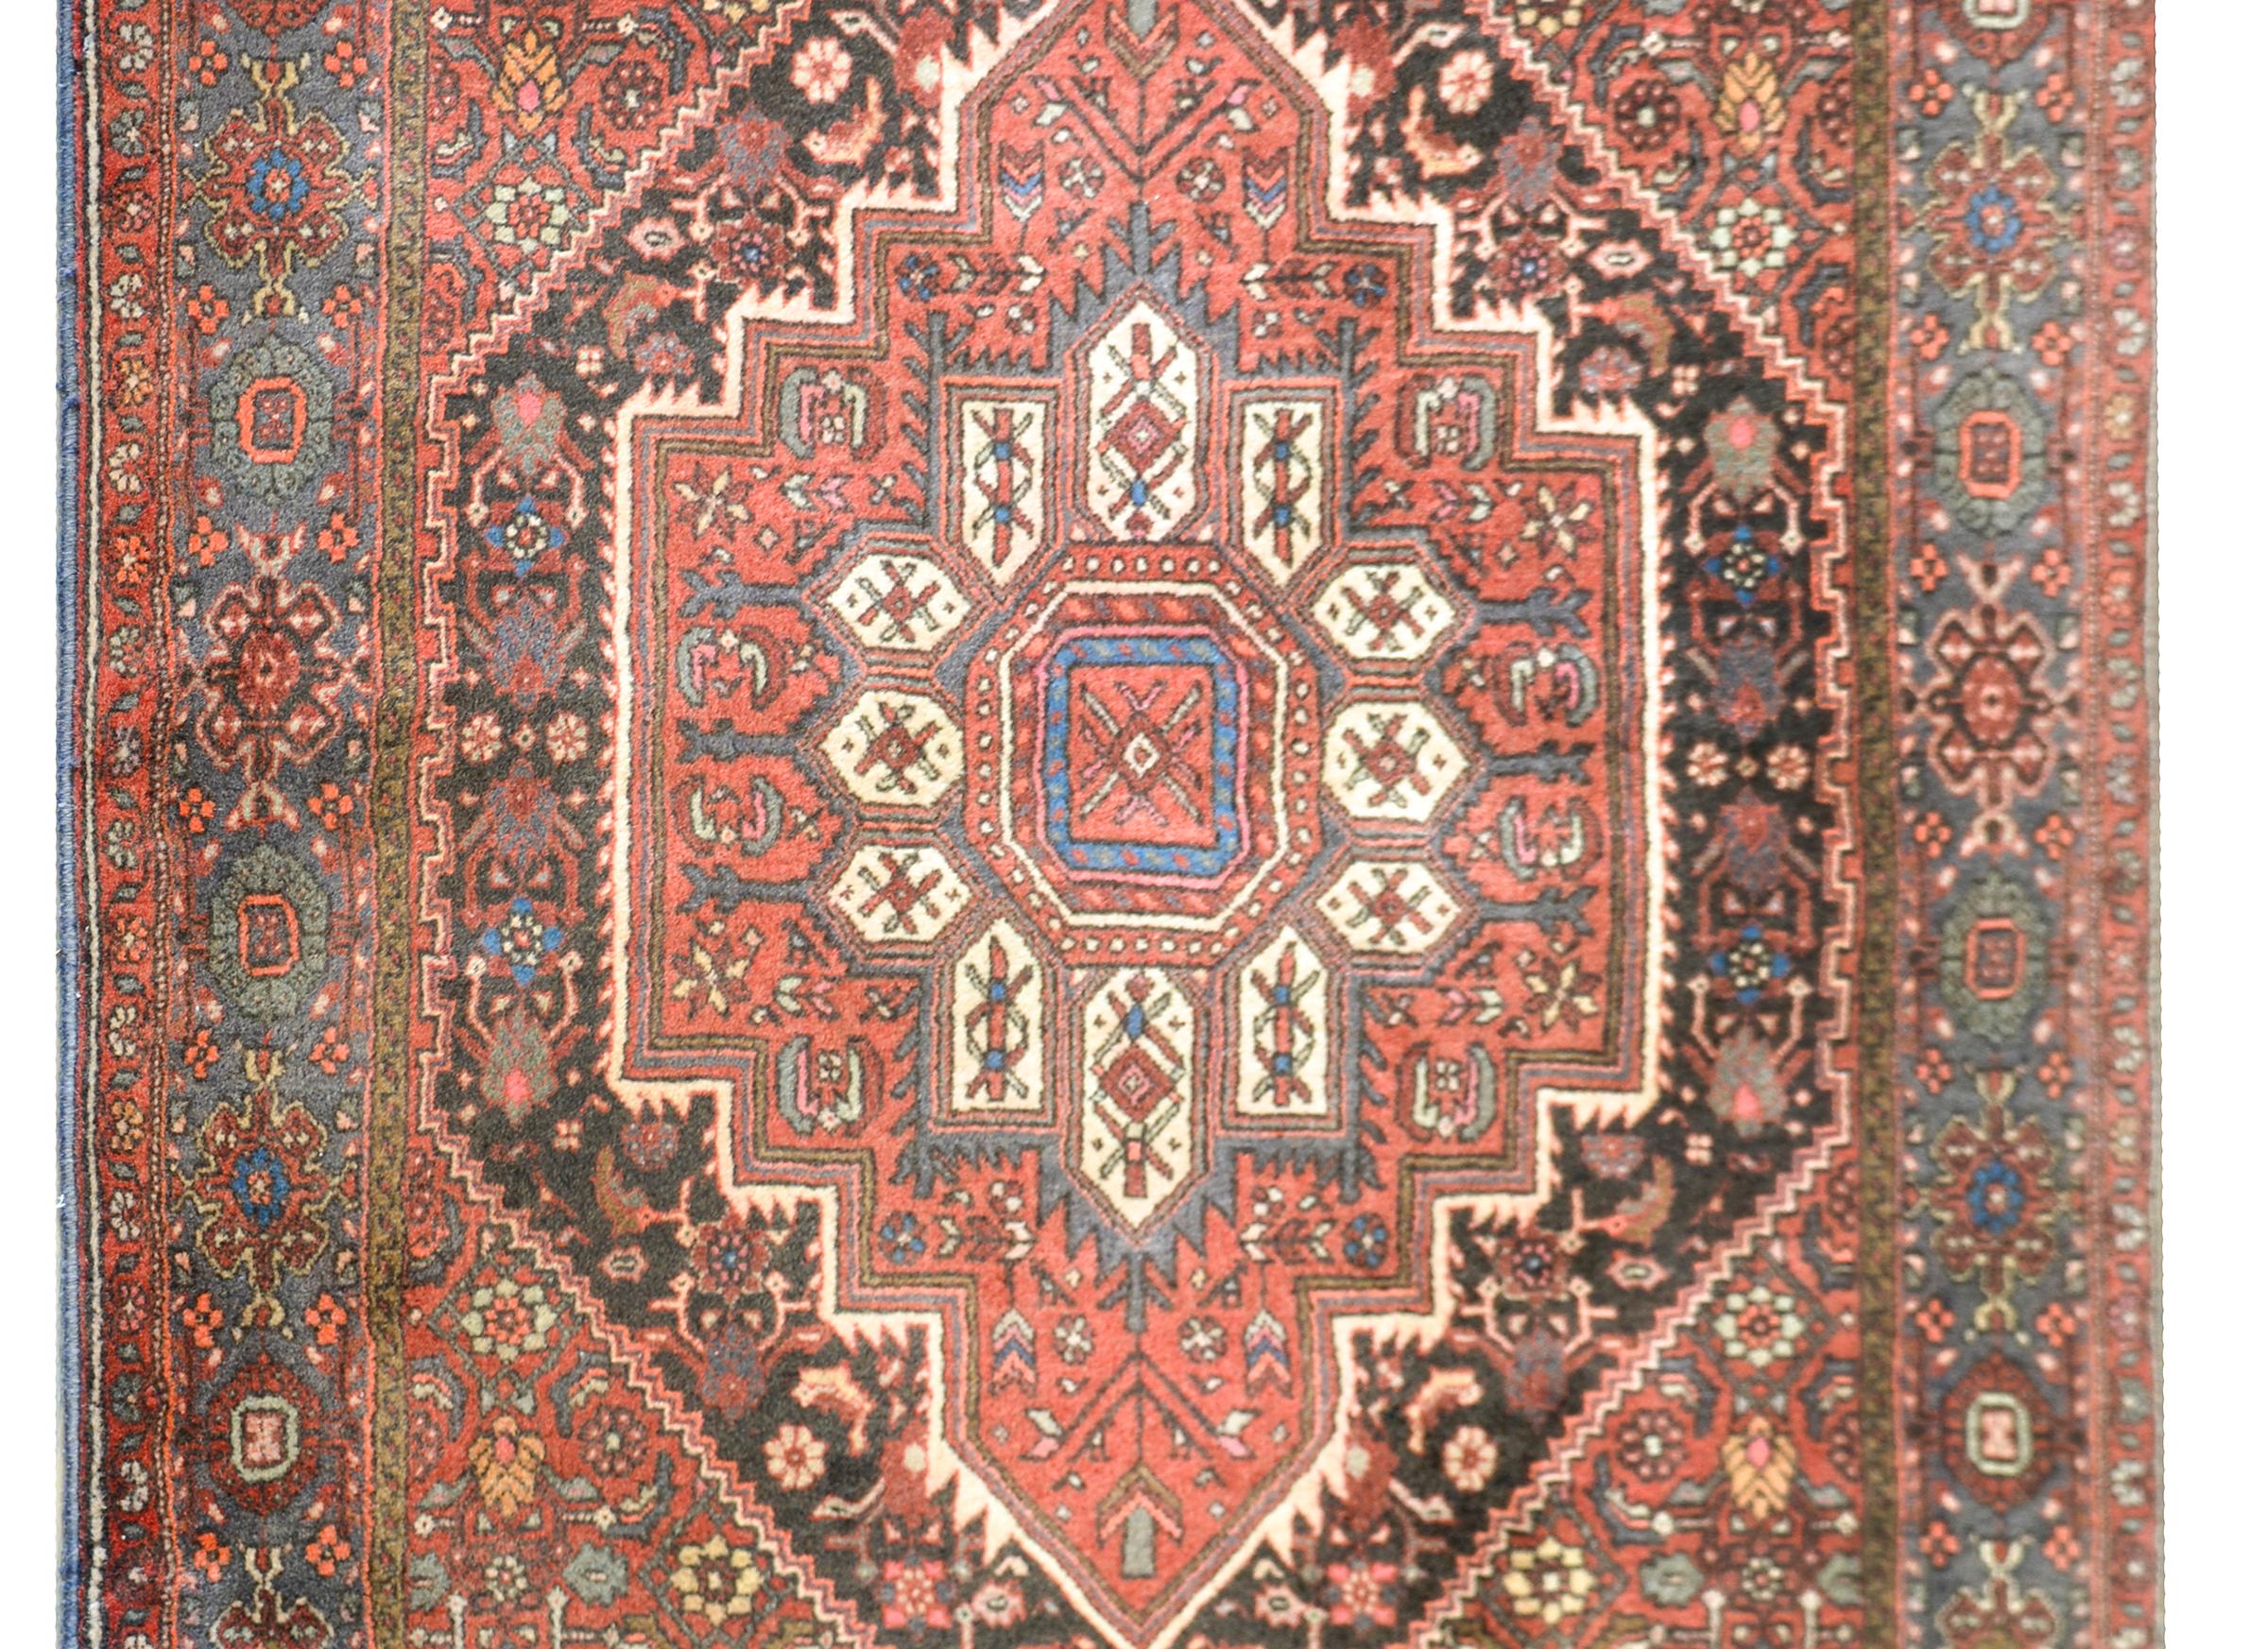 A beautiful vintage Persian Hamadan rug with a floral diamond medallion amidst a field of all-over flowers and scrolling vines, and surrounded by a wide large-scale floral patterned border.